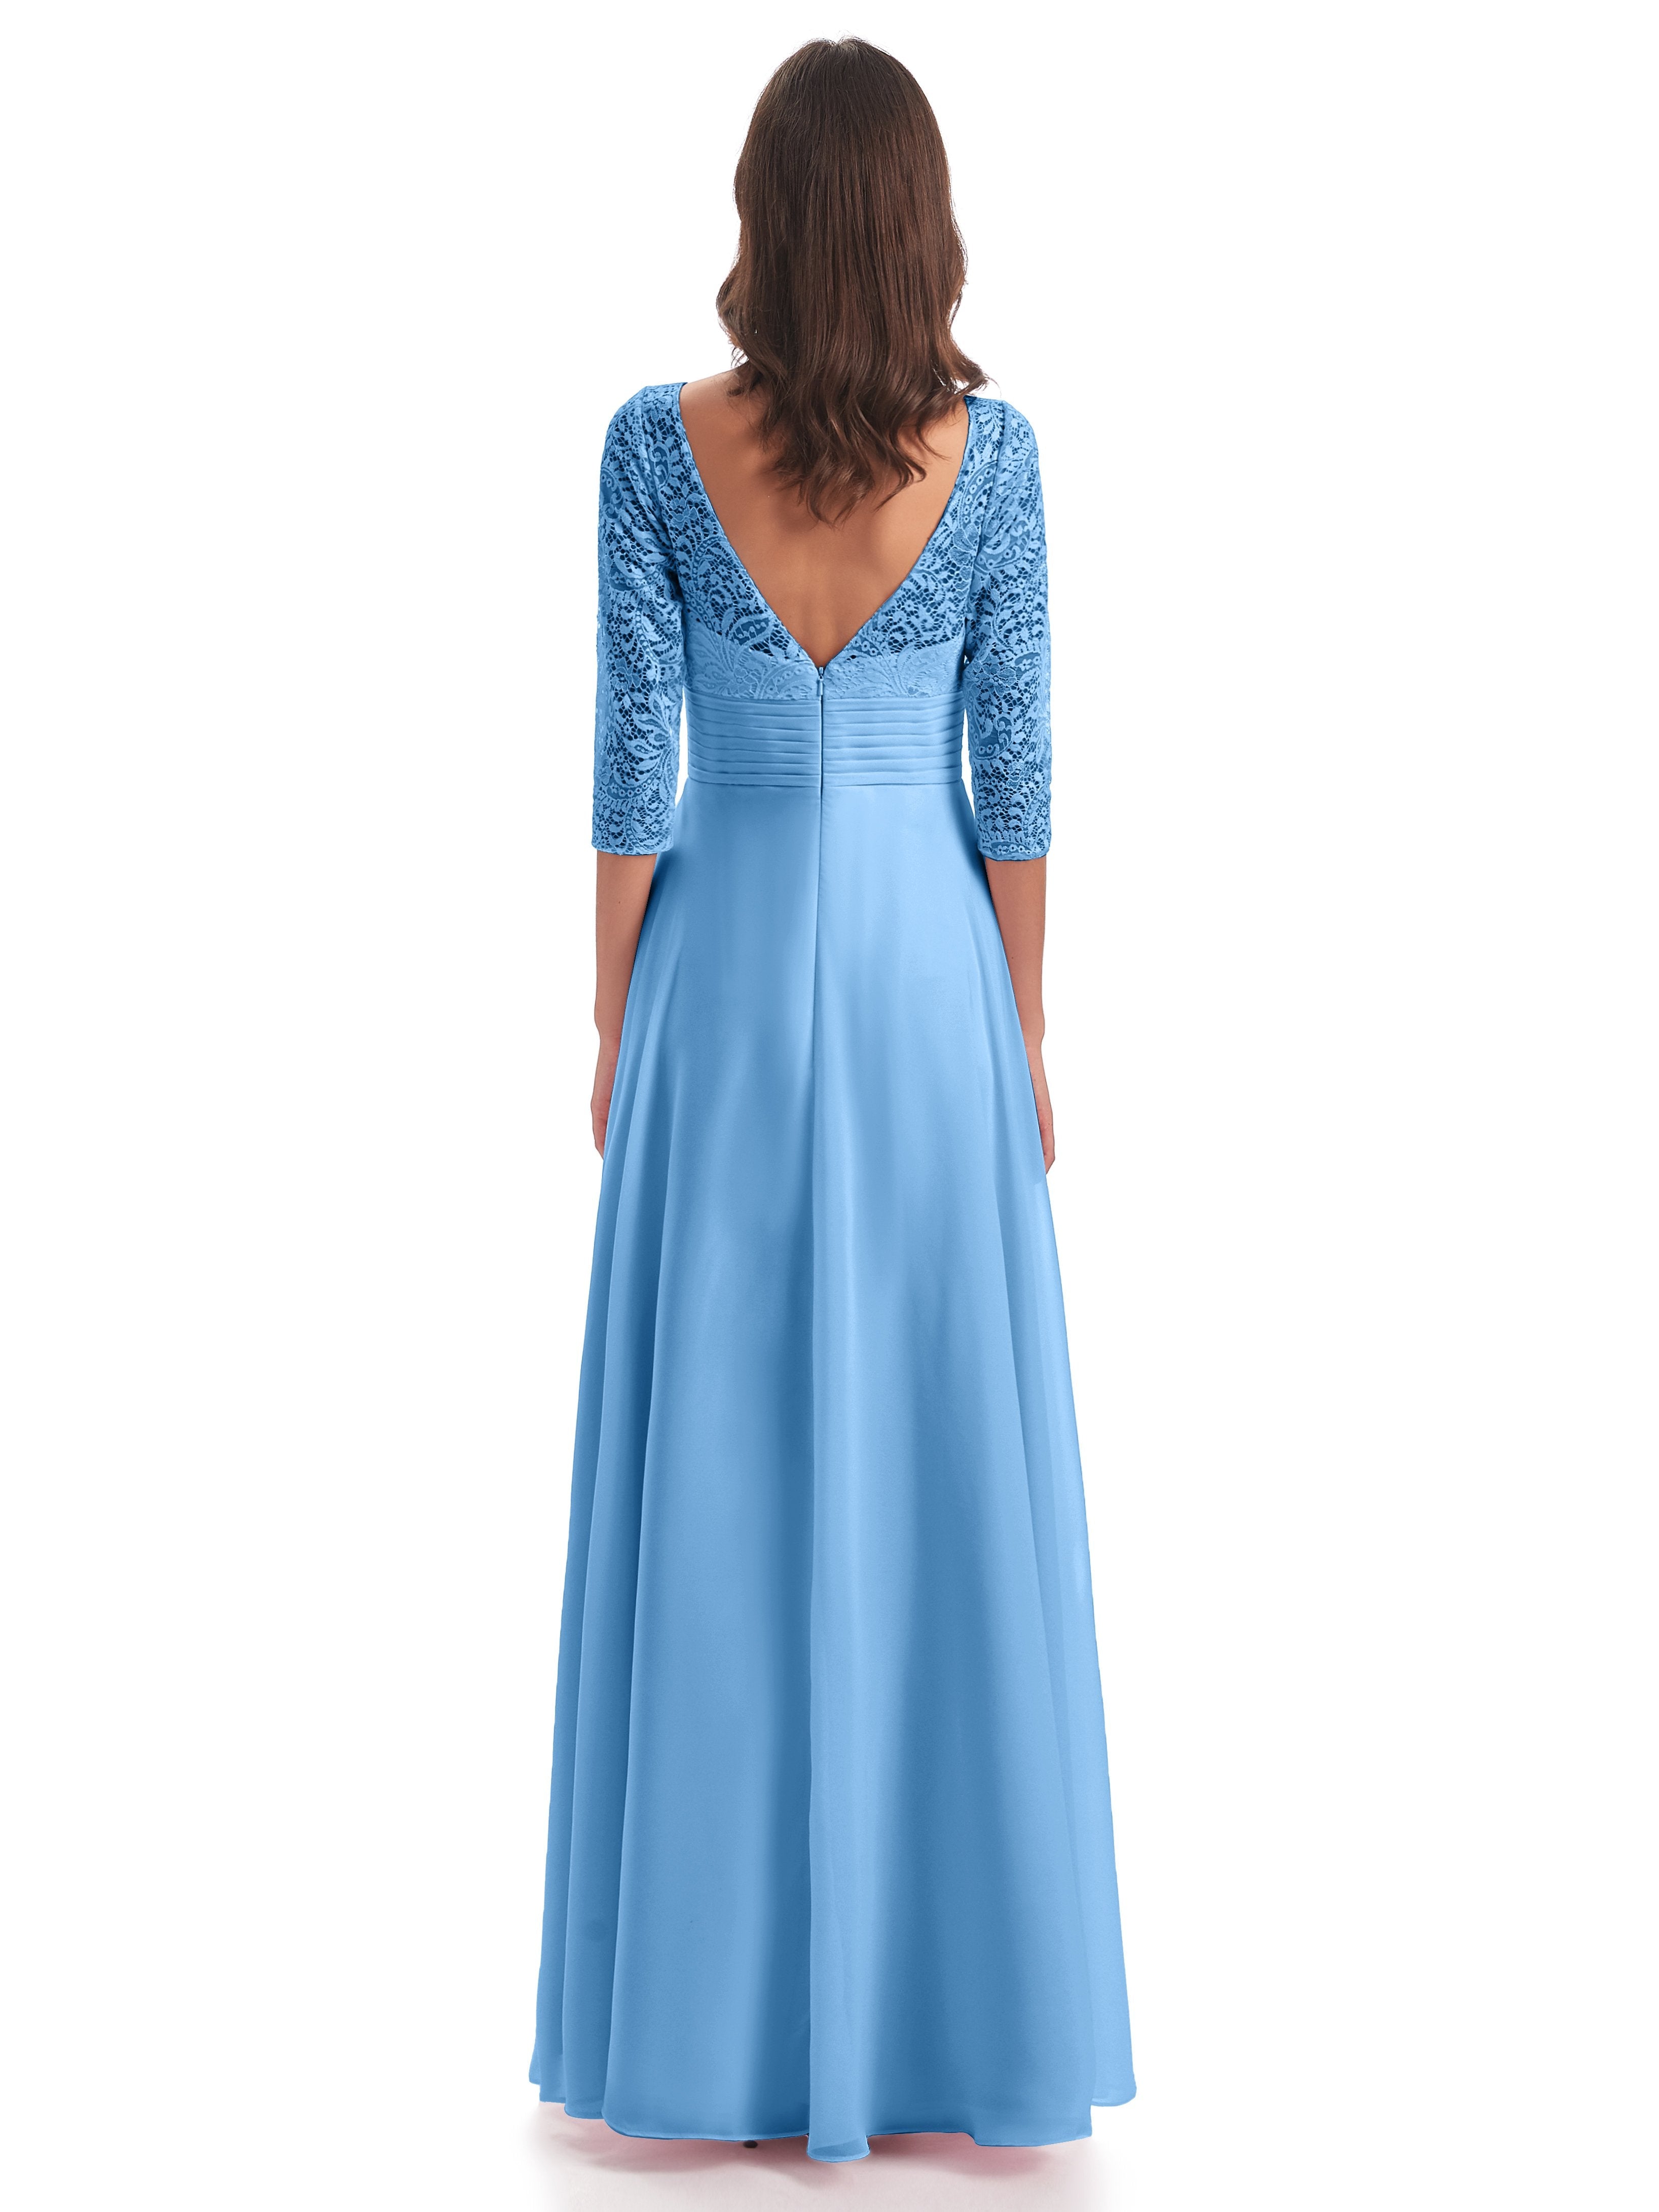 Florence V-Neck 3/4 Length Sleeves Lace Bridesmaid Dresses